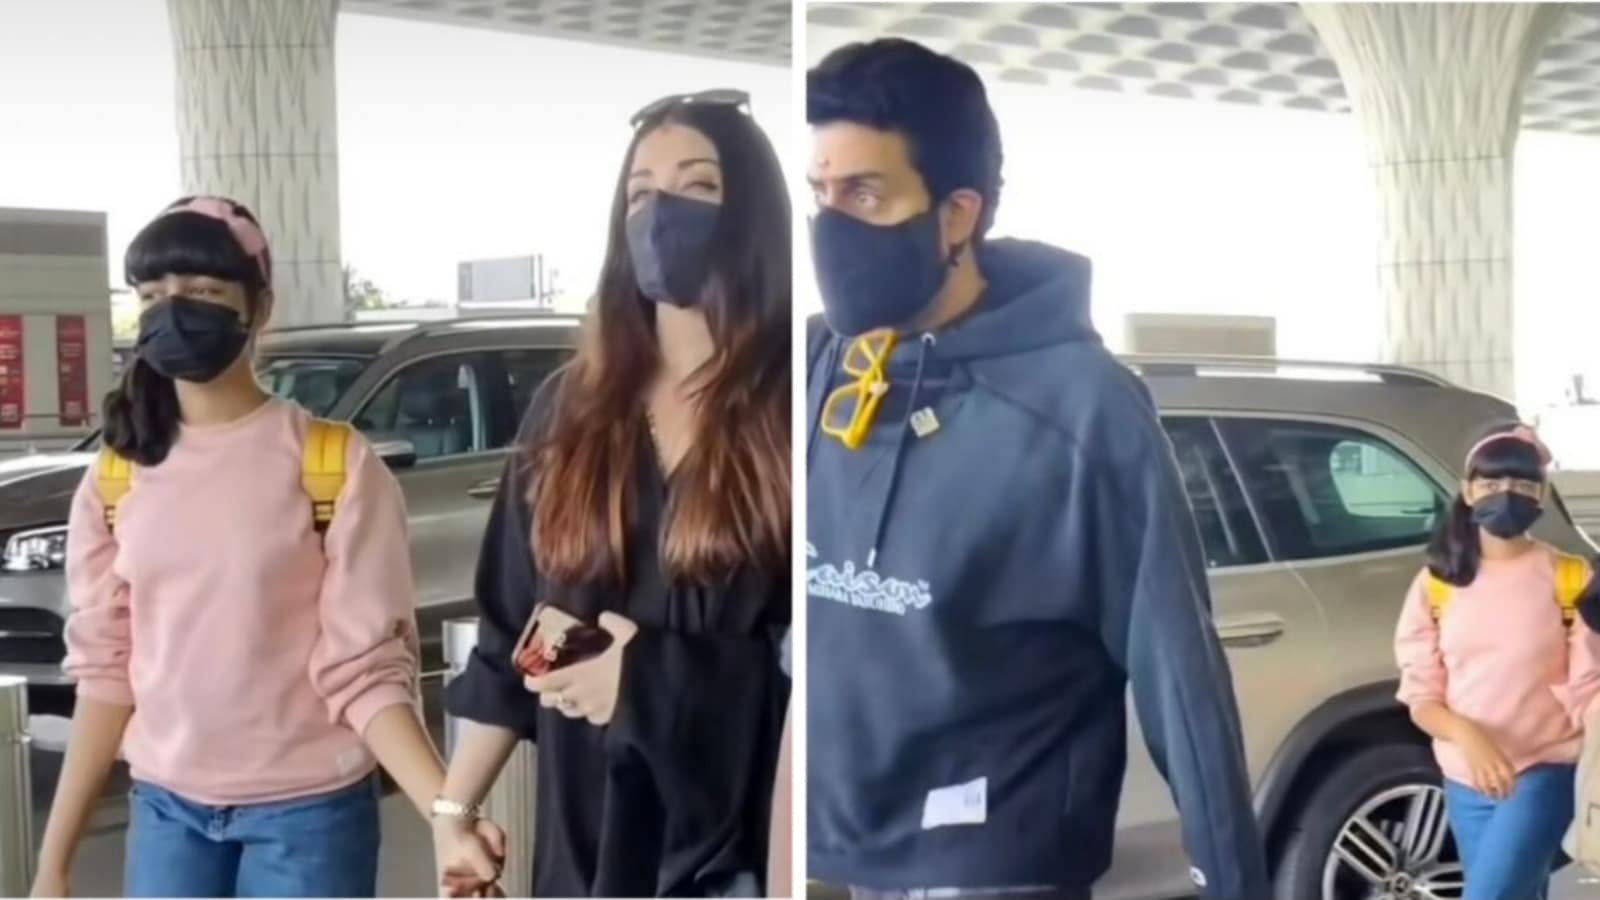 Aaradhya Bachchan holds Aishwarya Rai’s hand as they arrive at airport with Abhishek, fans say ‘she looks all grown up’